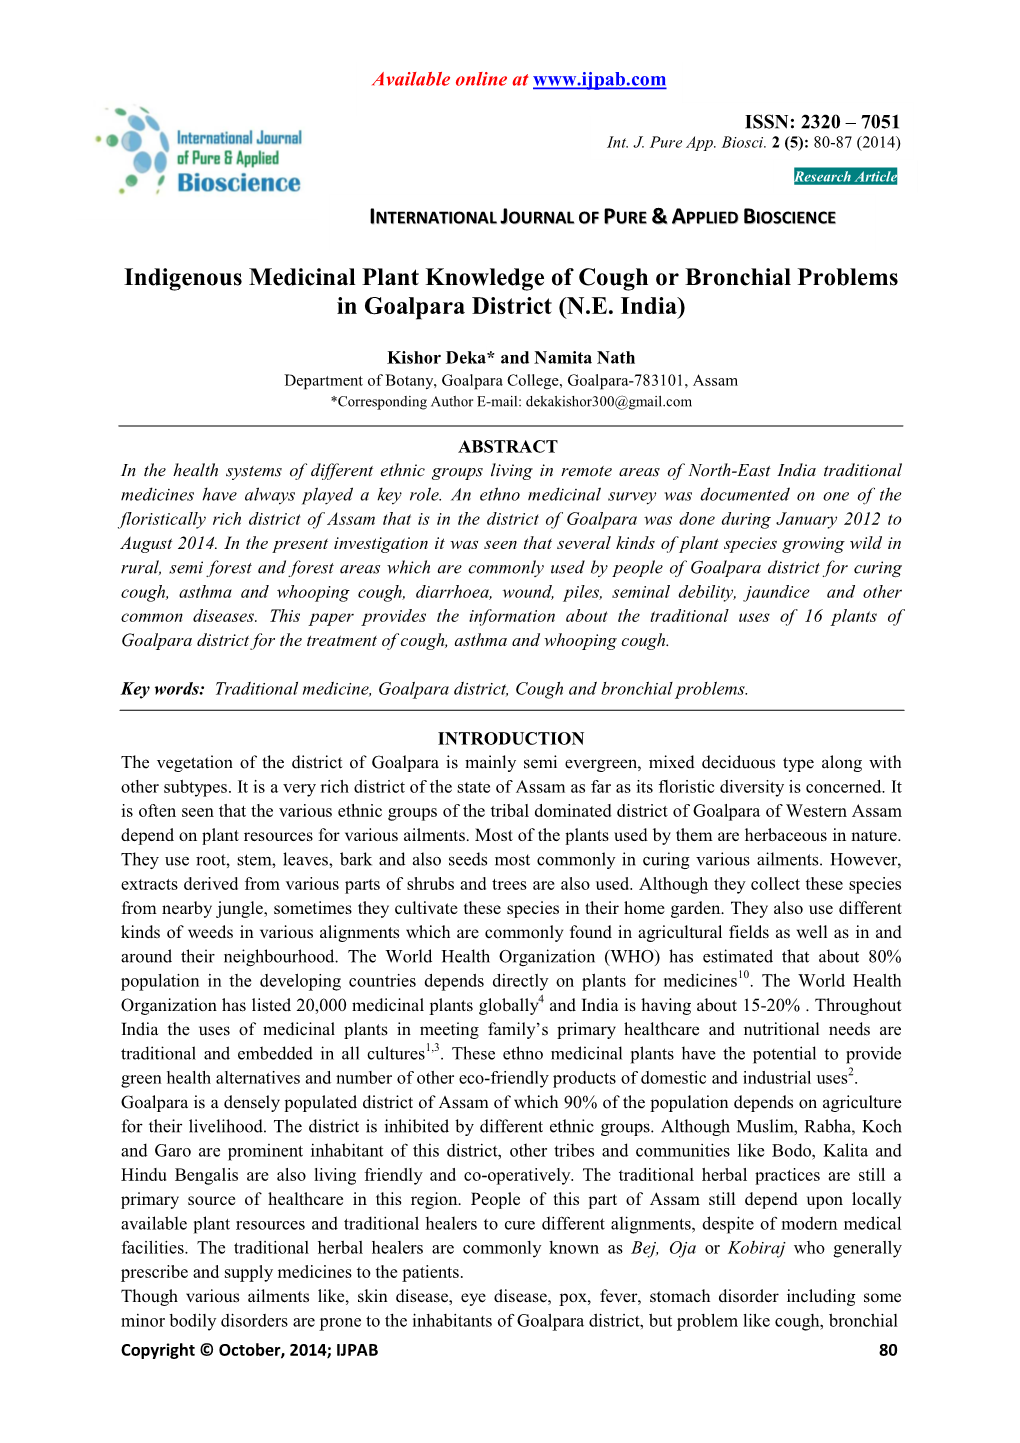 Indigenous Medicinal Plant Knowledge of Cough Or Bronchial Problems in Goalpara District (N.E